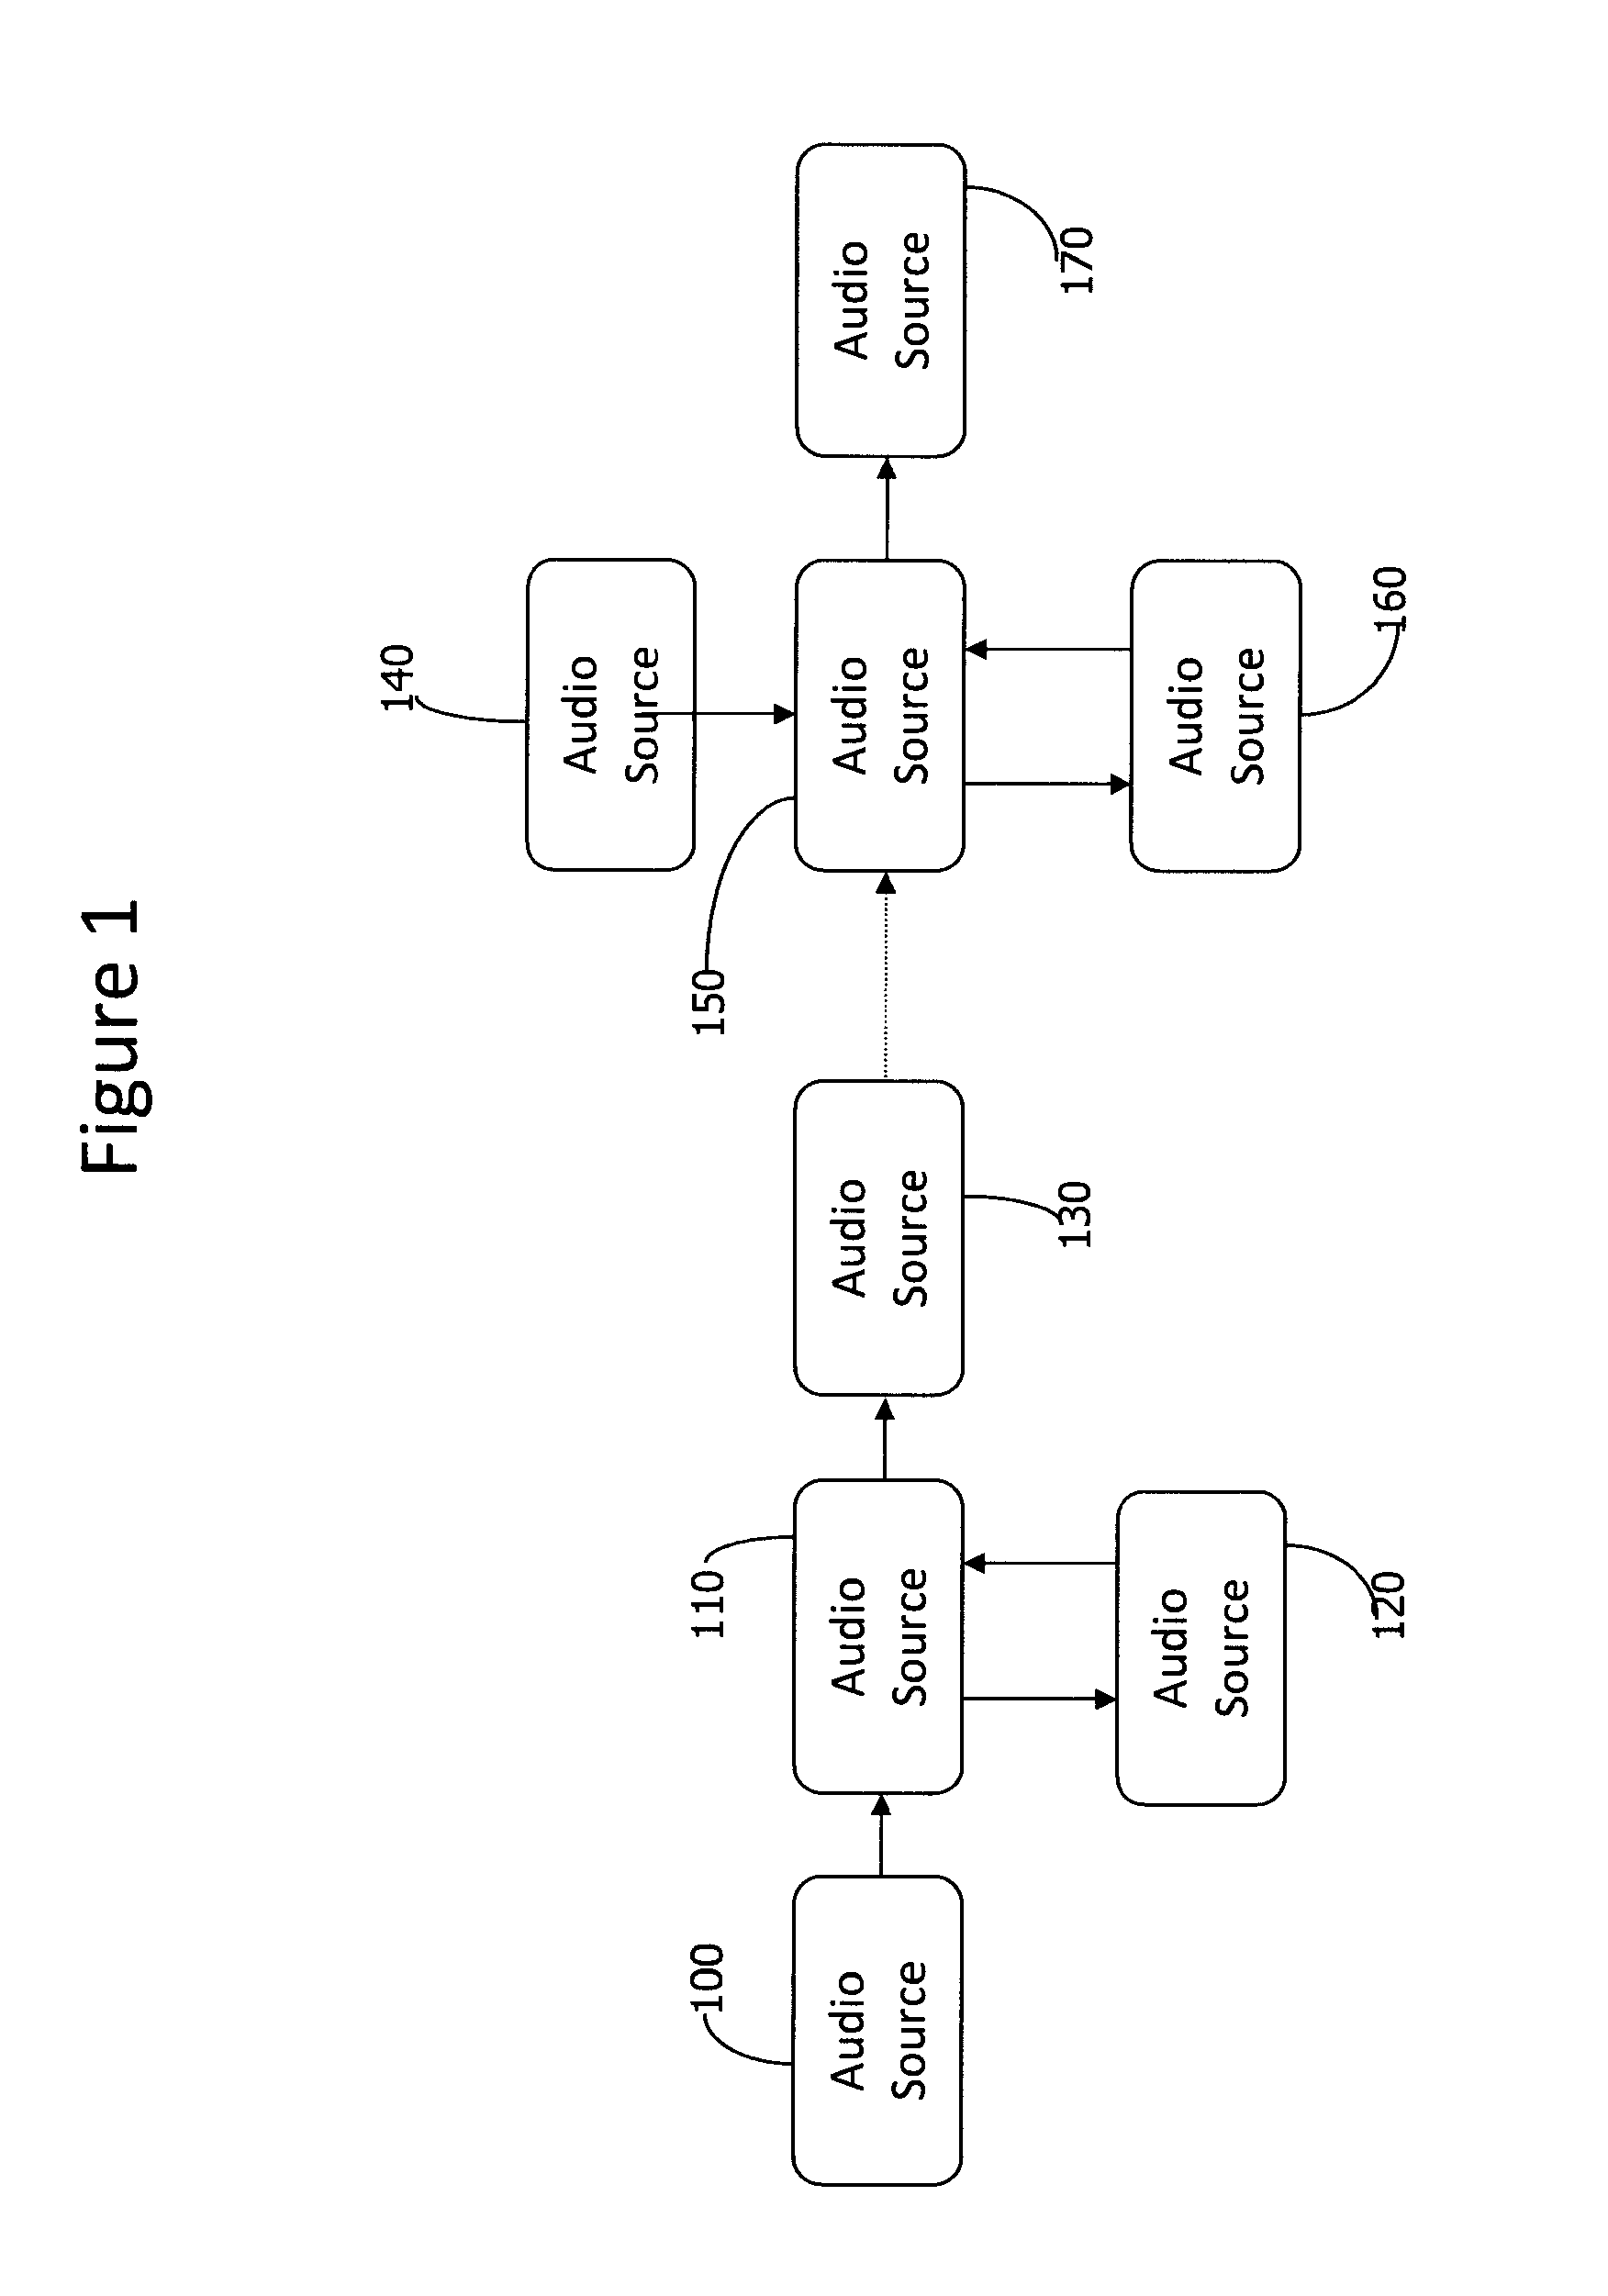 Method and process for reducing tinnitus